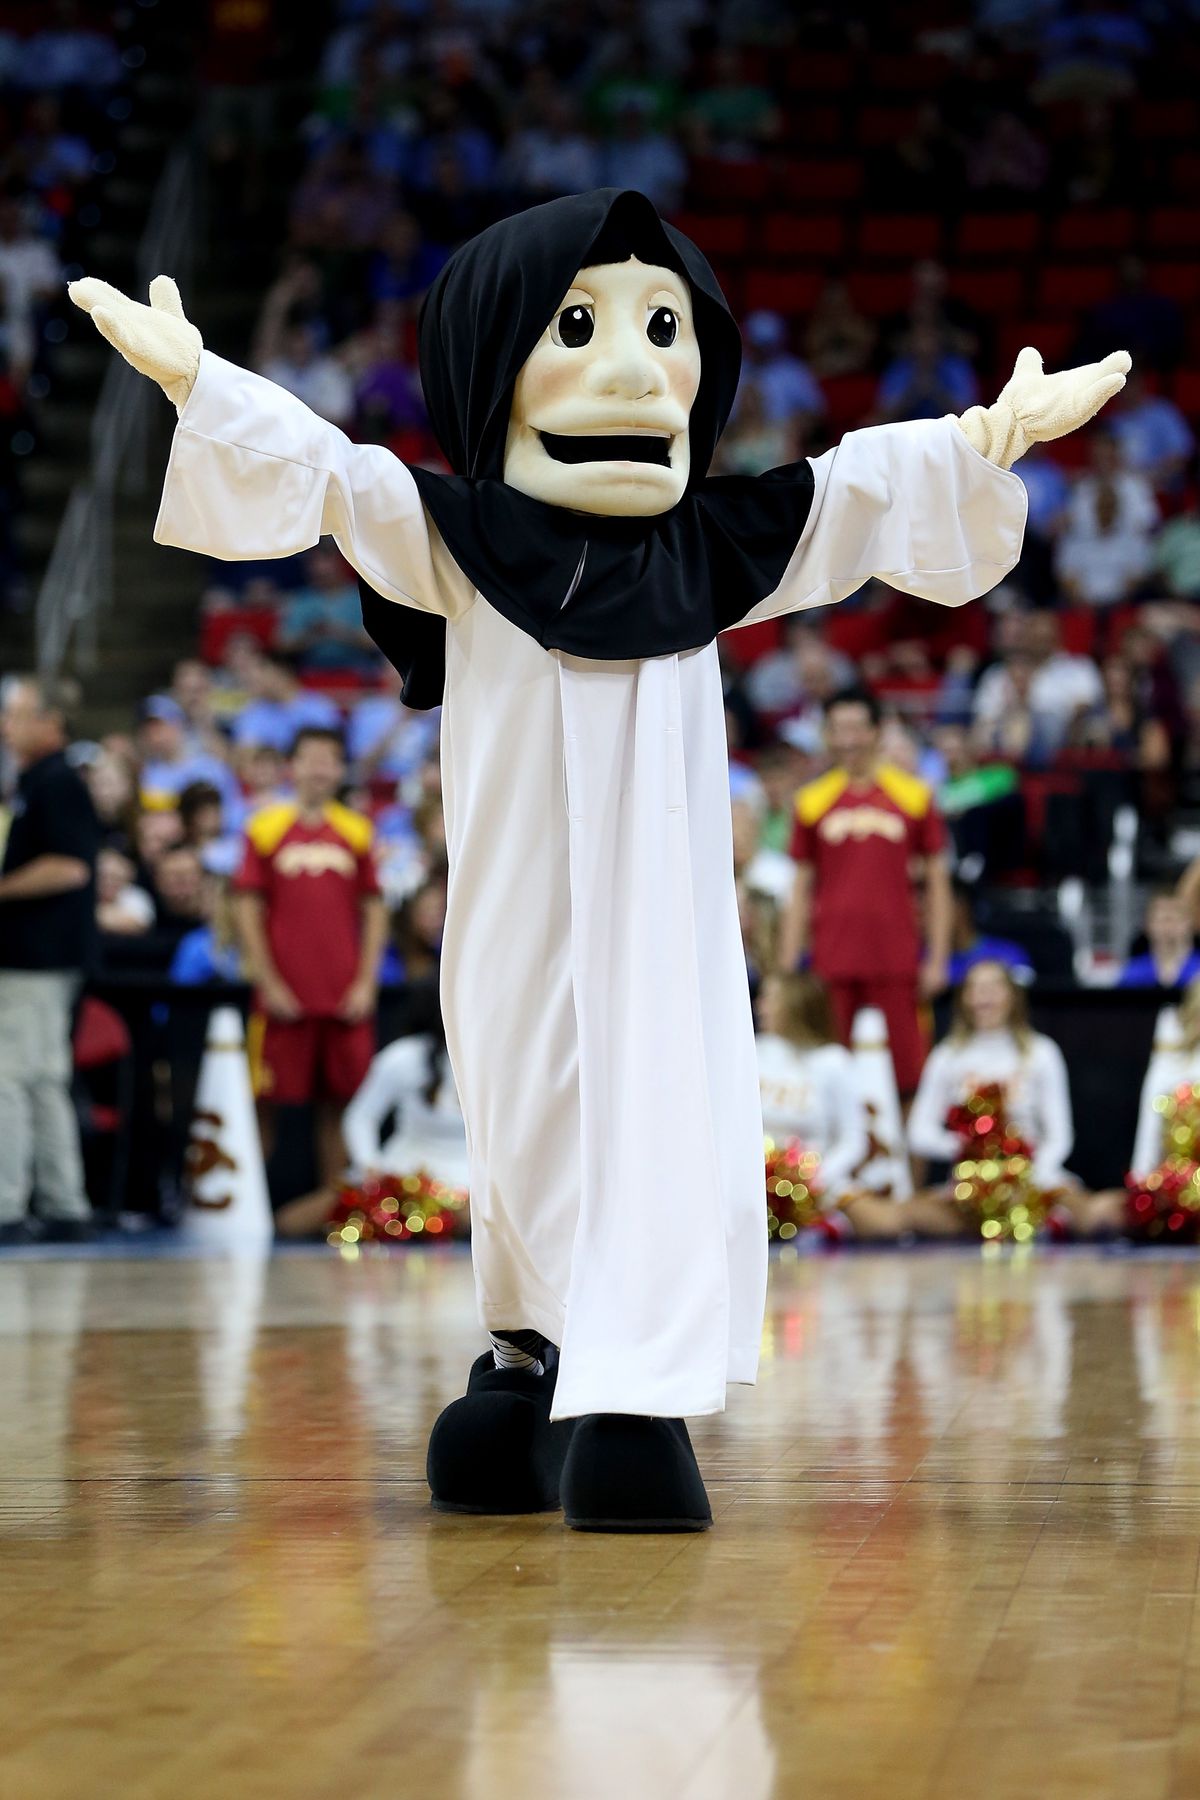 NCAA Basketball Tournament - First Round - Providence v Southern California